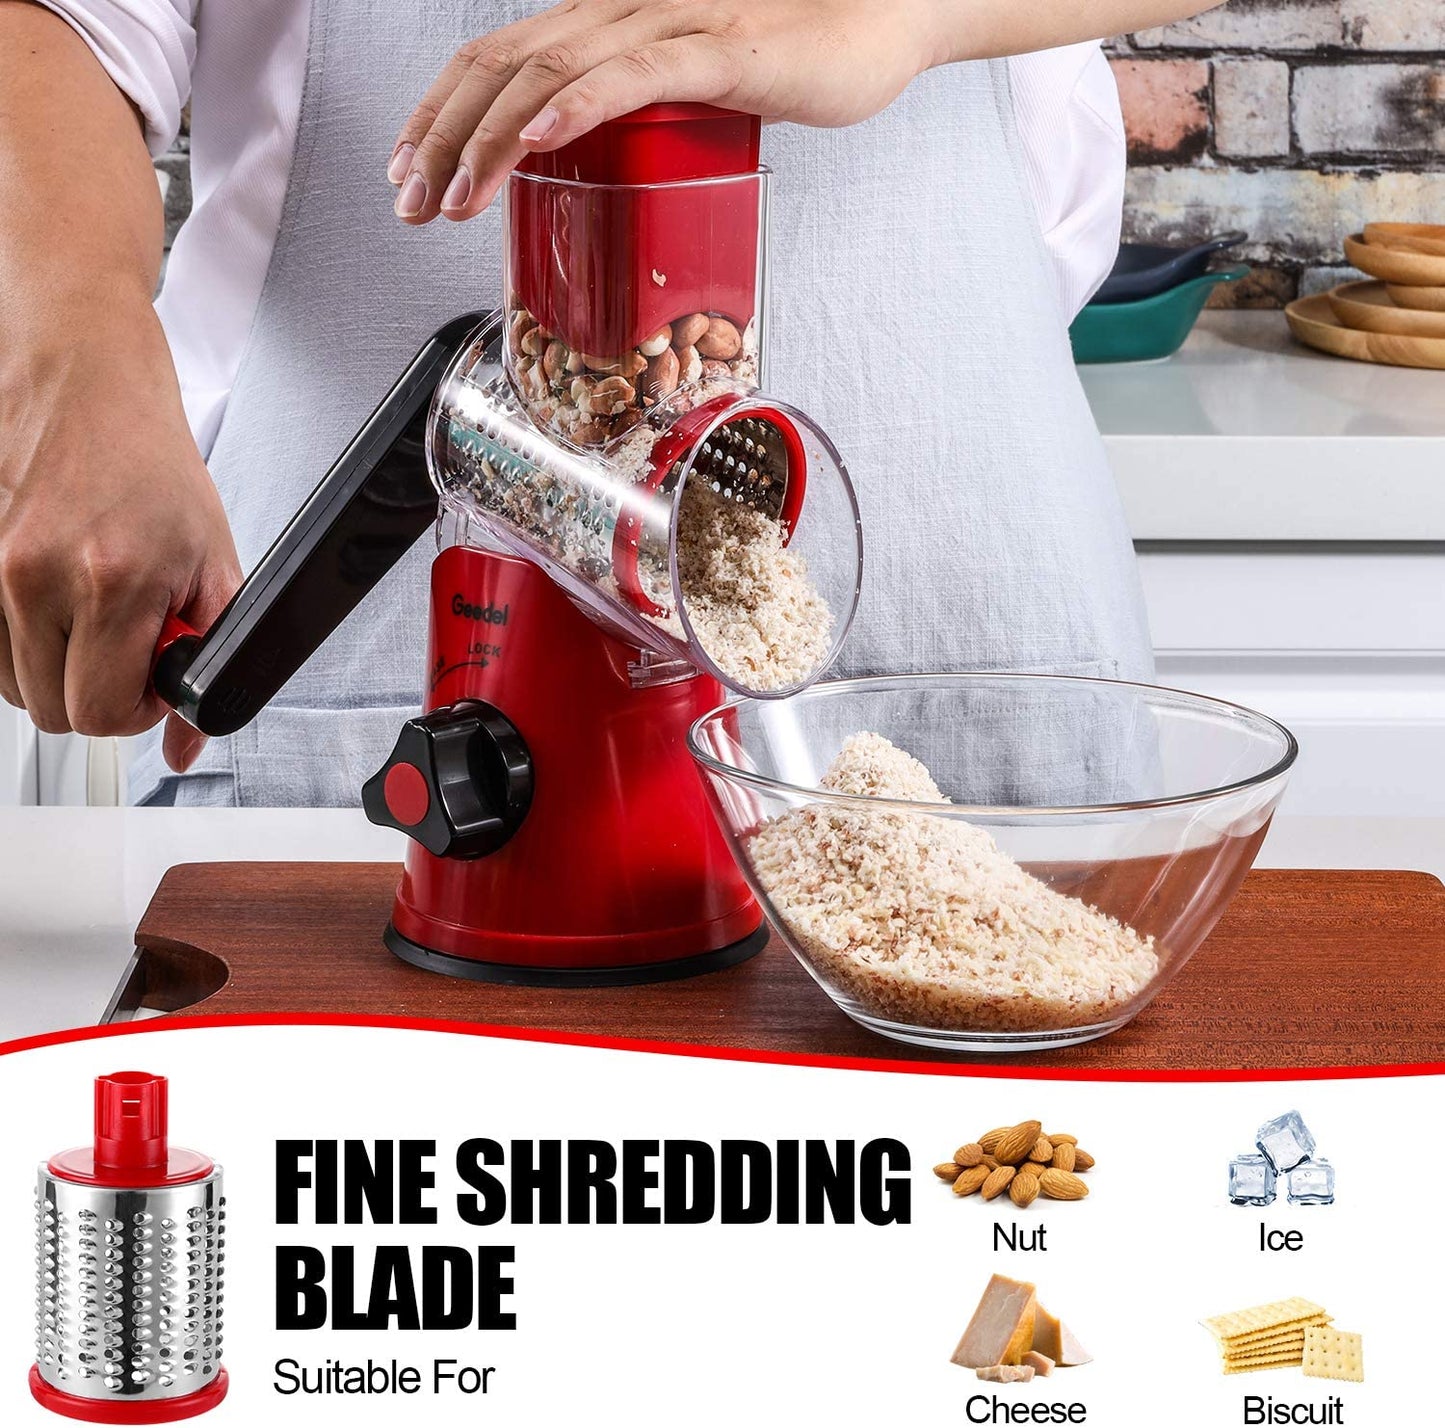 Geedel Rotary Cheese Grater, Kitchen Mandoline Vegetable Slicer with 3 Interchangeable Blades, Easy to Clean Grater for Fruit, Vegetables, Nuts